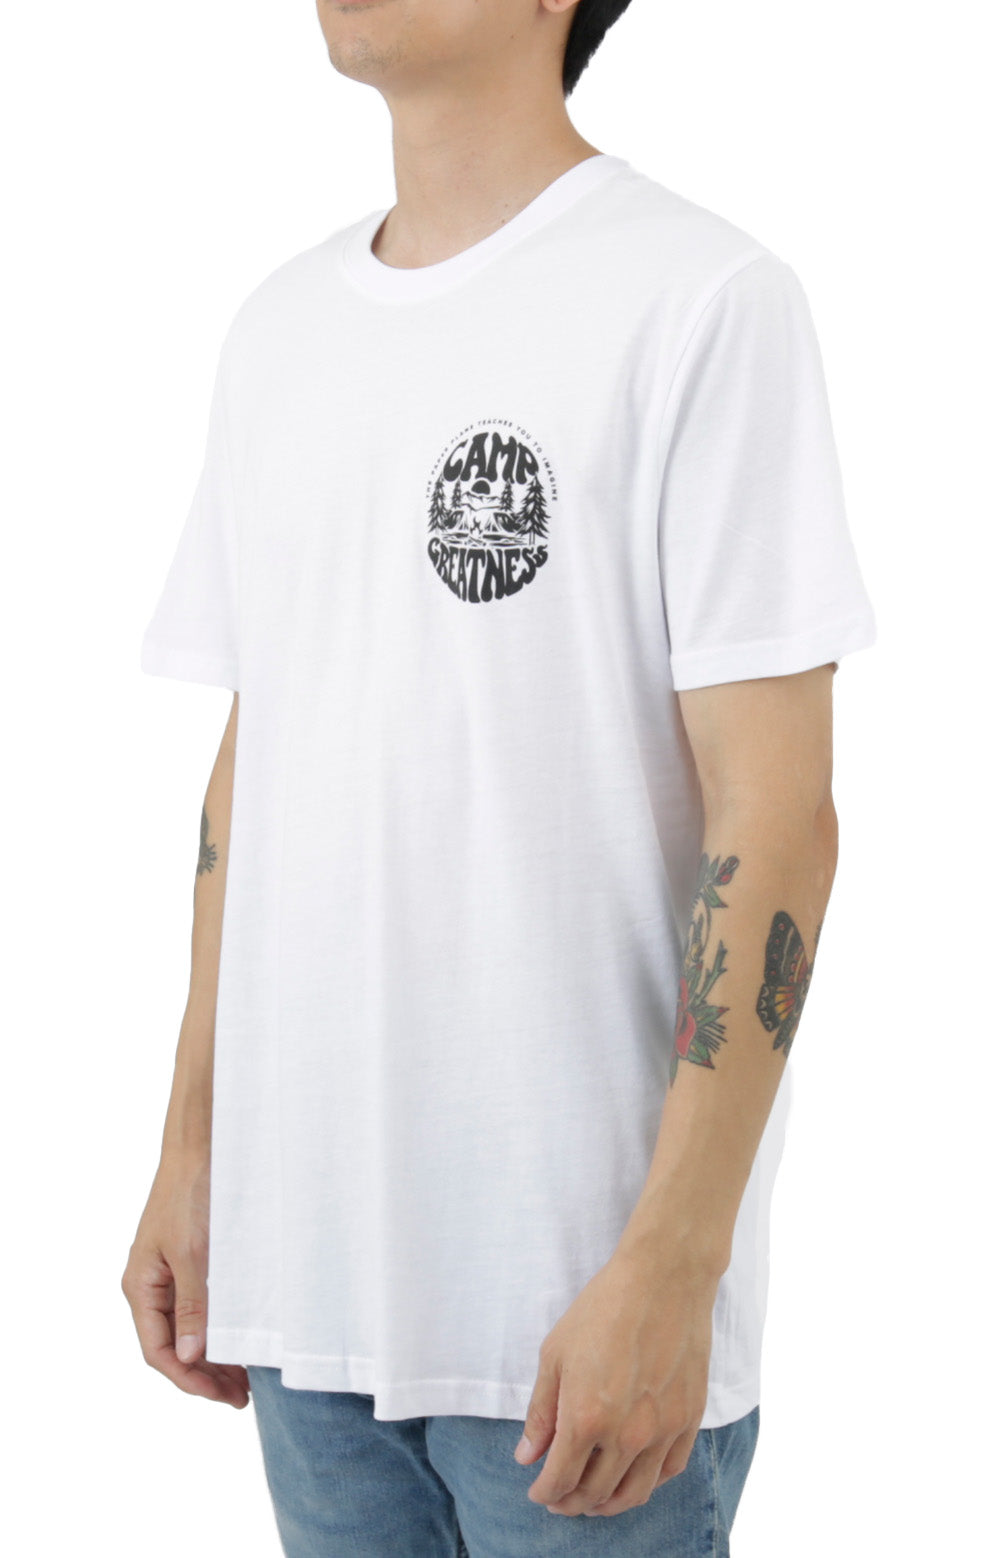 Camp Greatness T-Shirt - White